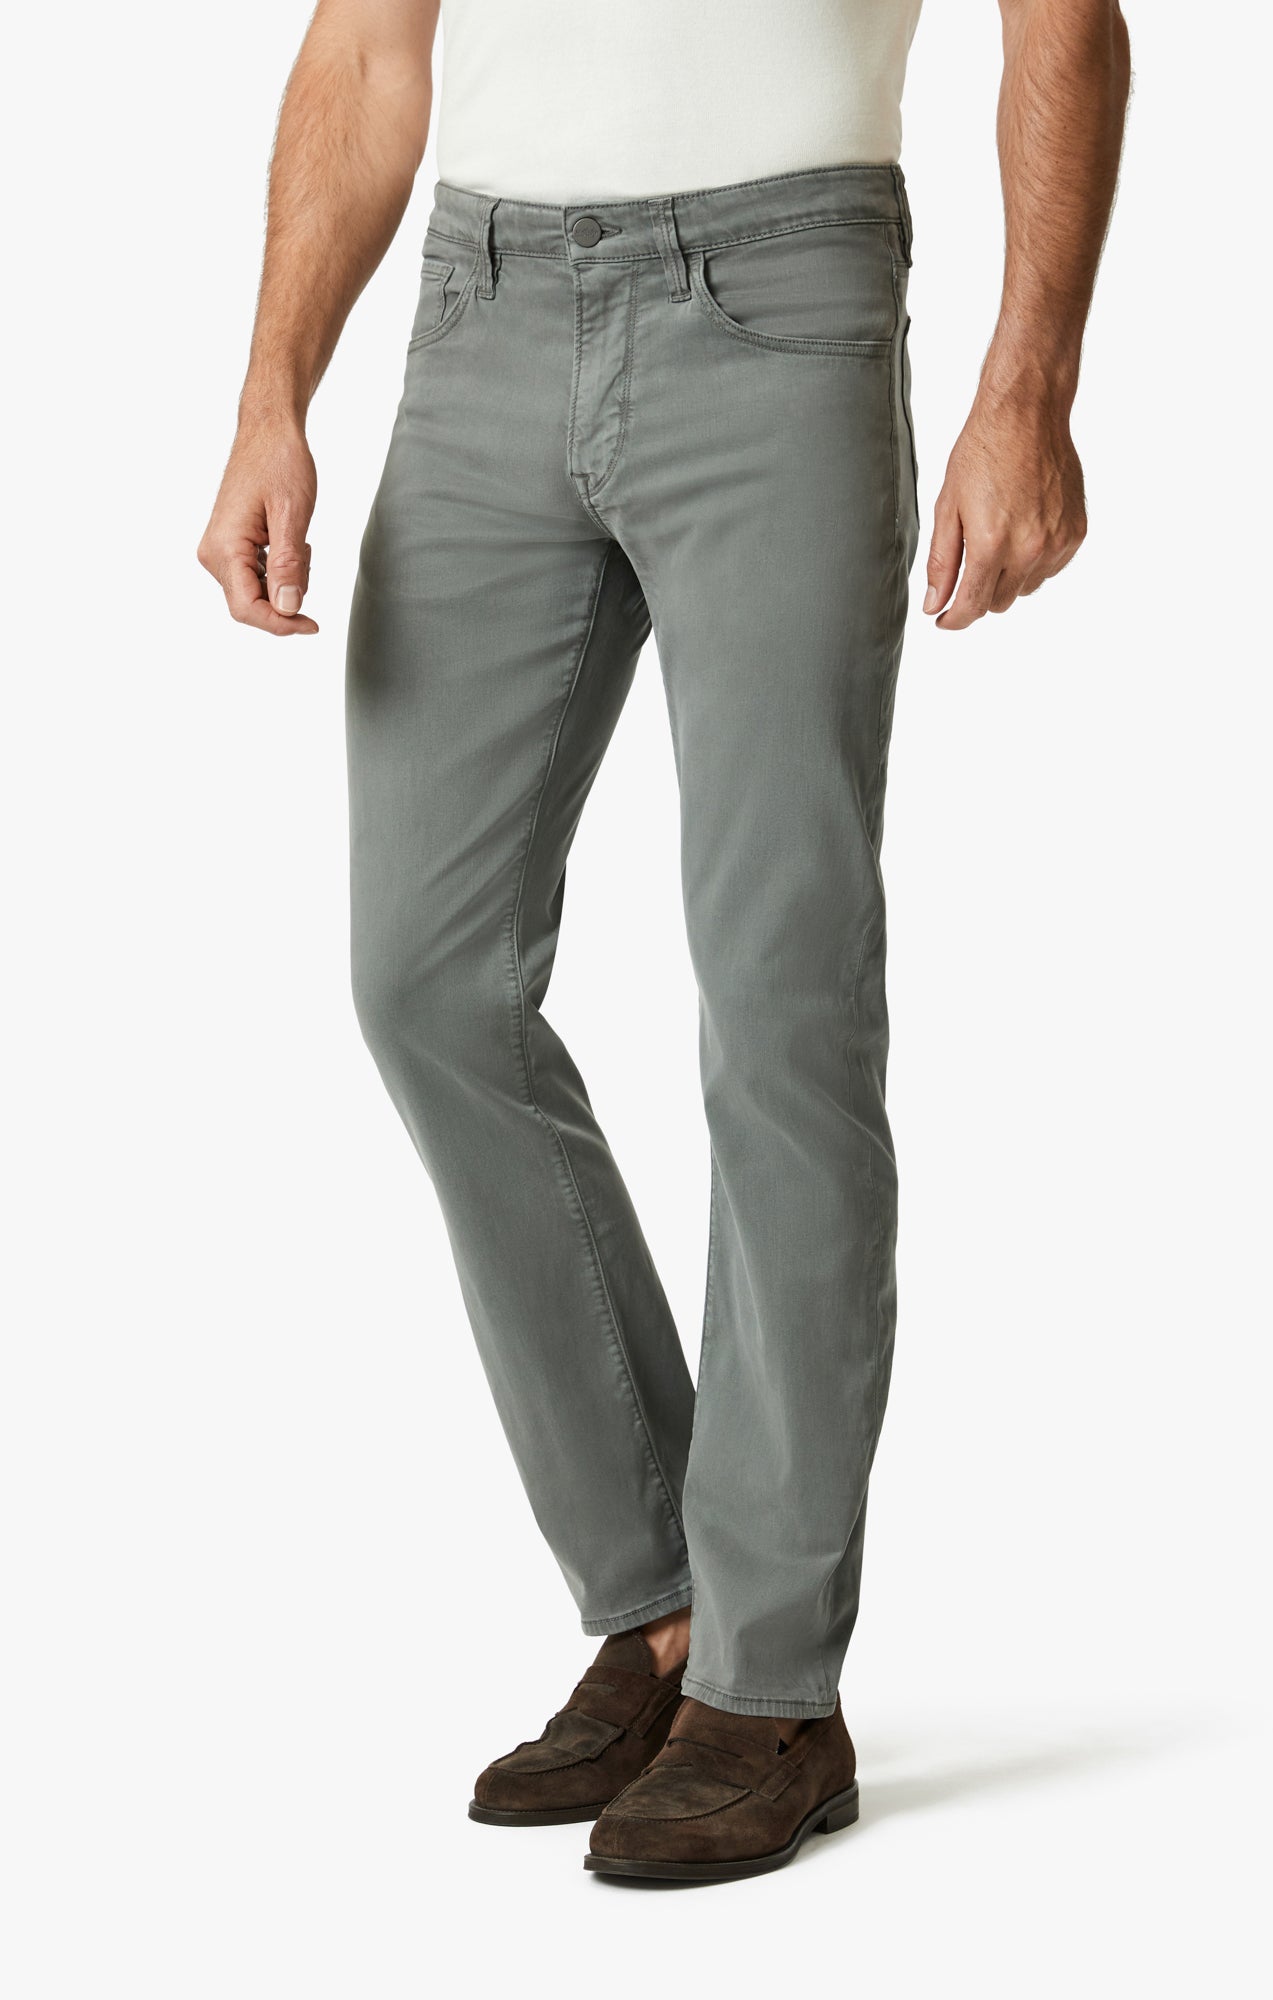 Charisma Relaxed Straight Leg Pants In Sedona Sage Twill